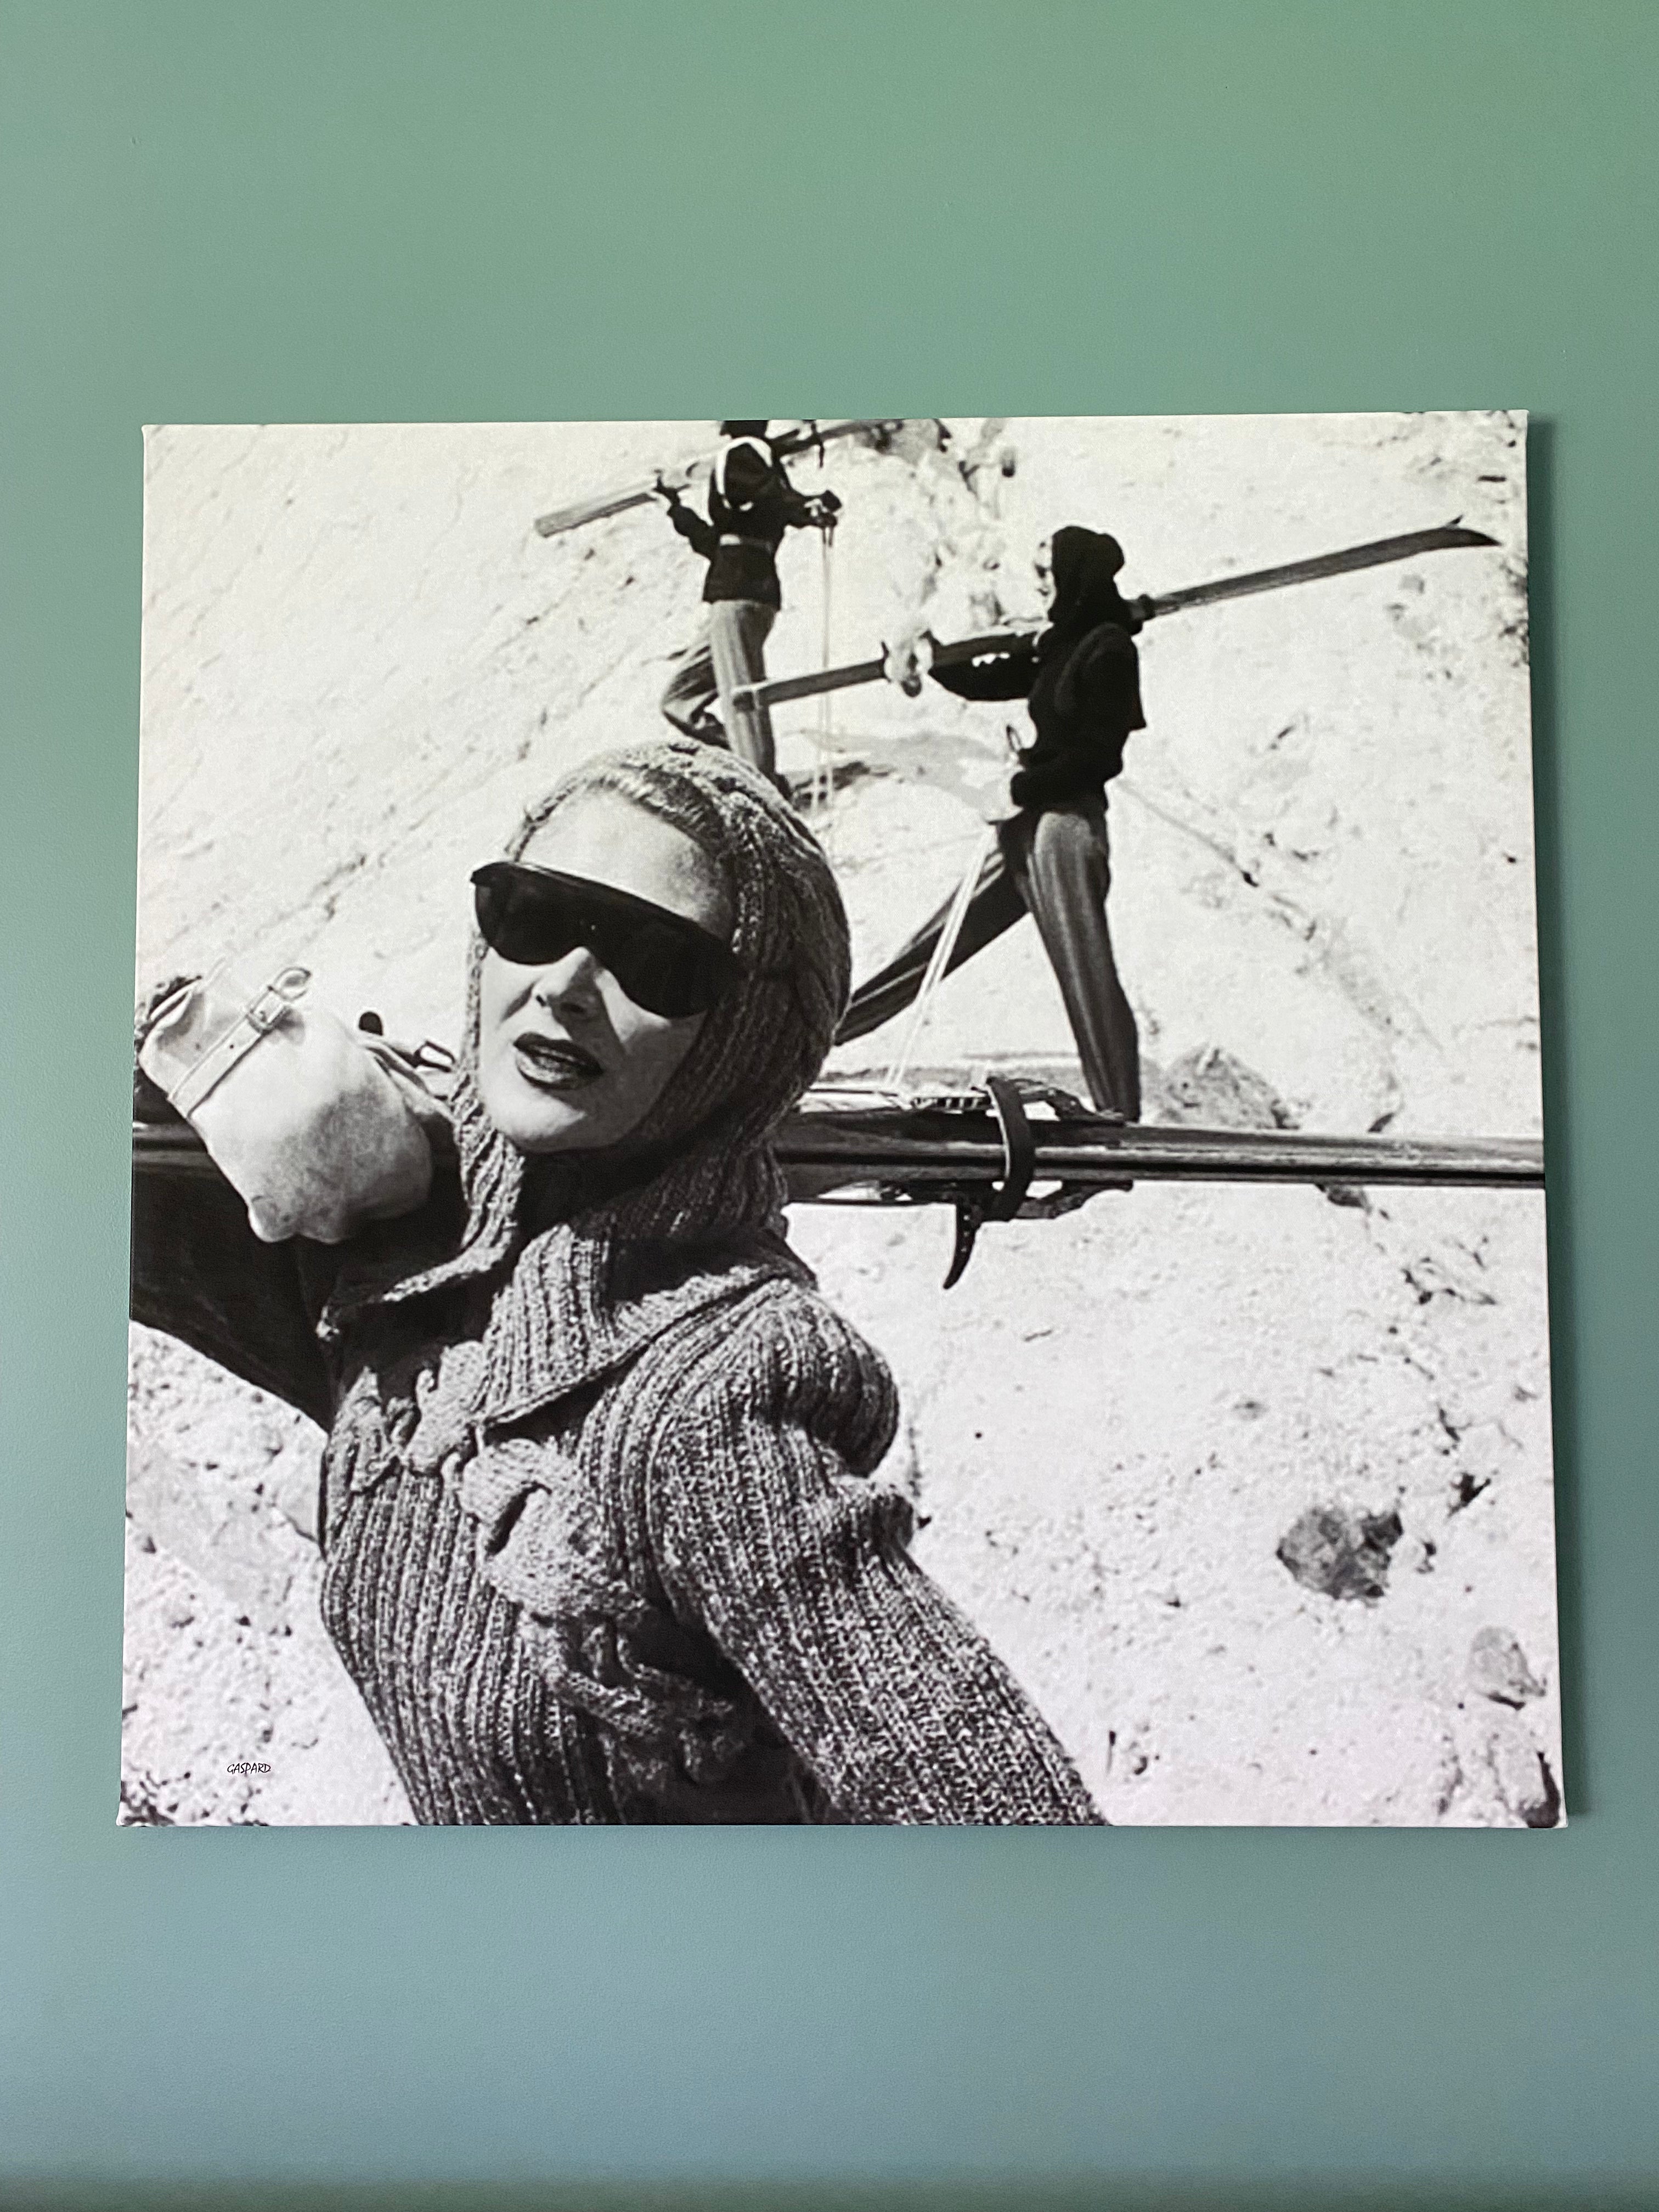 A black and white vintage photo depicting a woman in sunglasses wearing a knitted jumper and a snug hooded cowl in foreground with skis on her shoulders looking directly at the camera, with two women in the background standing with wooden skis on their shoulders on a snowy tracked out slope.  Hanging on a green wall.